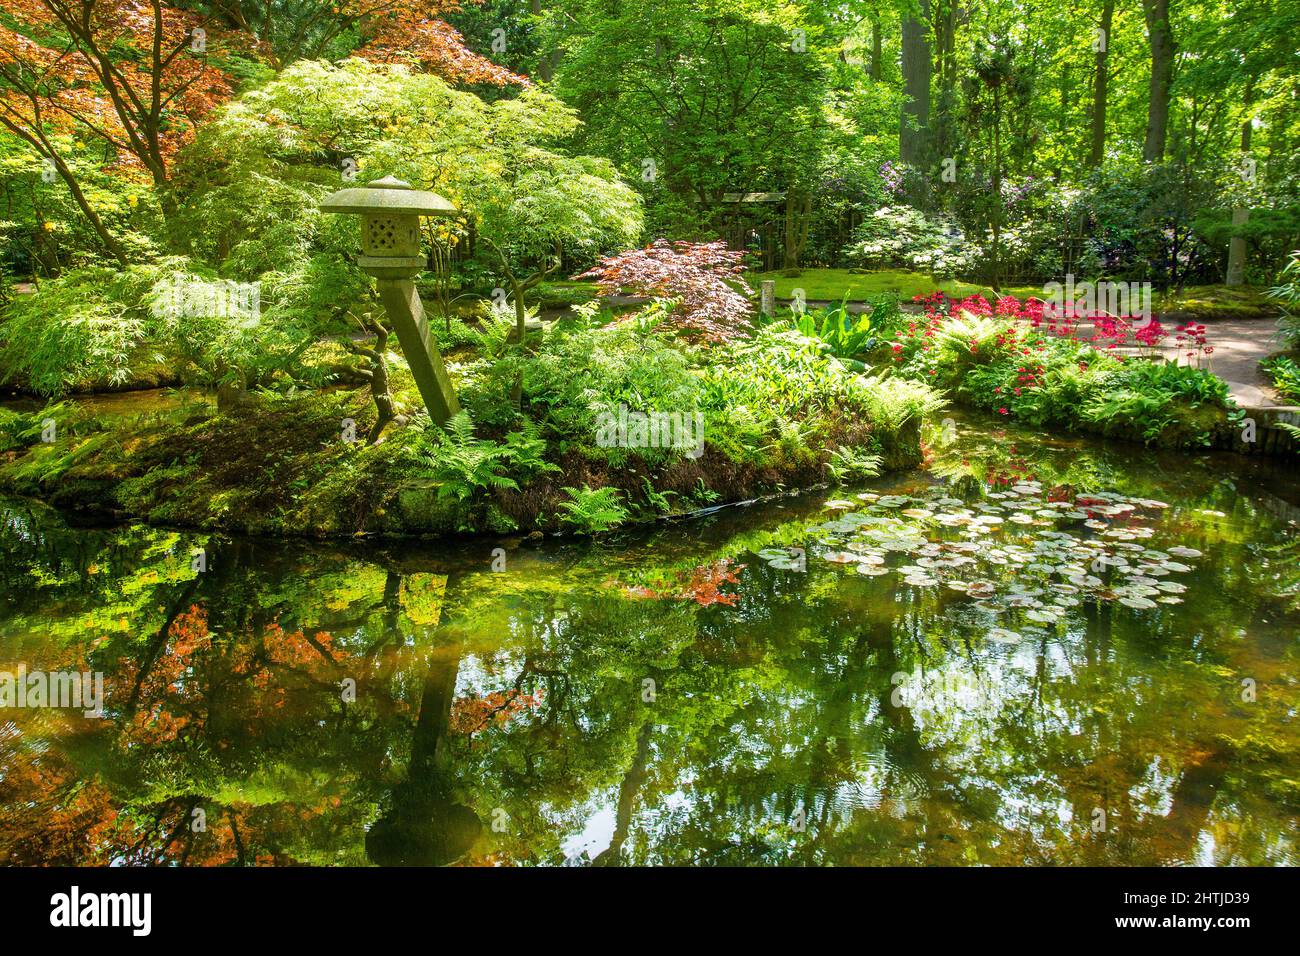 Idyllic green view with stone lantern and meandering pond in japanese garden in the Hague: redleaf palmate acer and primroses and reflections in water Stock Photo